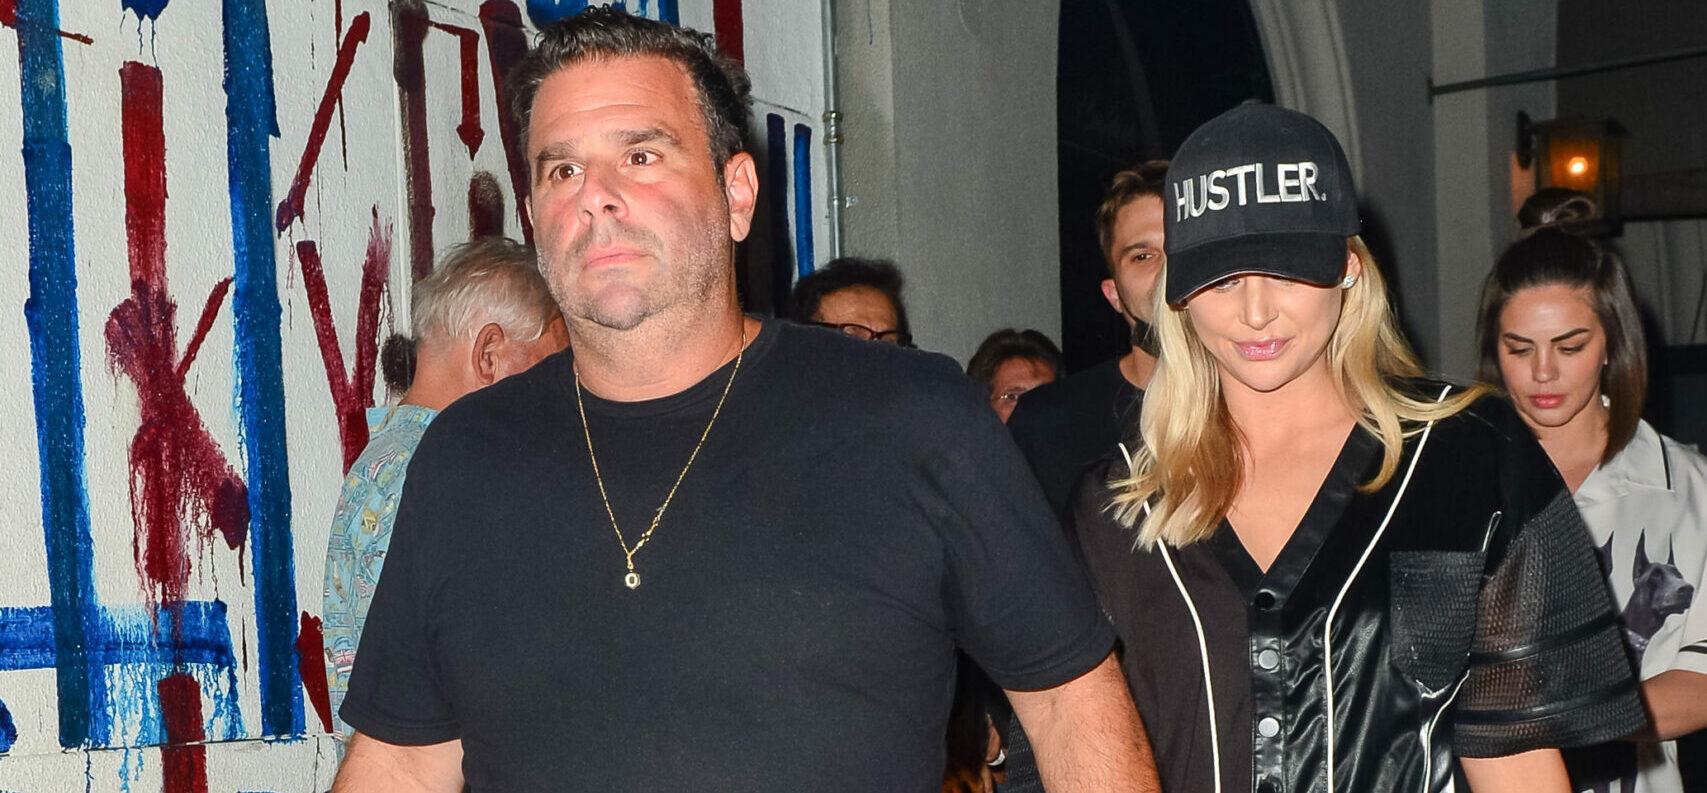 Randall Emmett Offers To Be ‘The Joke’ In Bitter Breakup If That’s What Lala Kent ‘Needs’